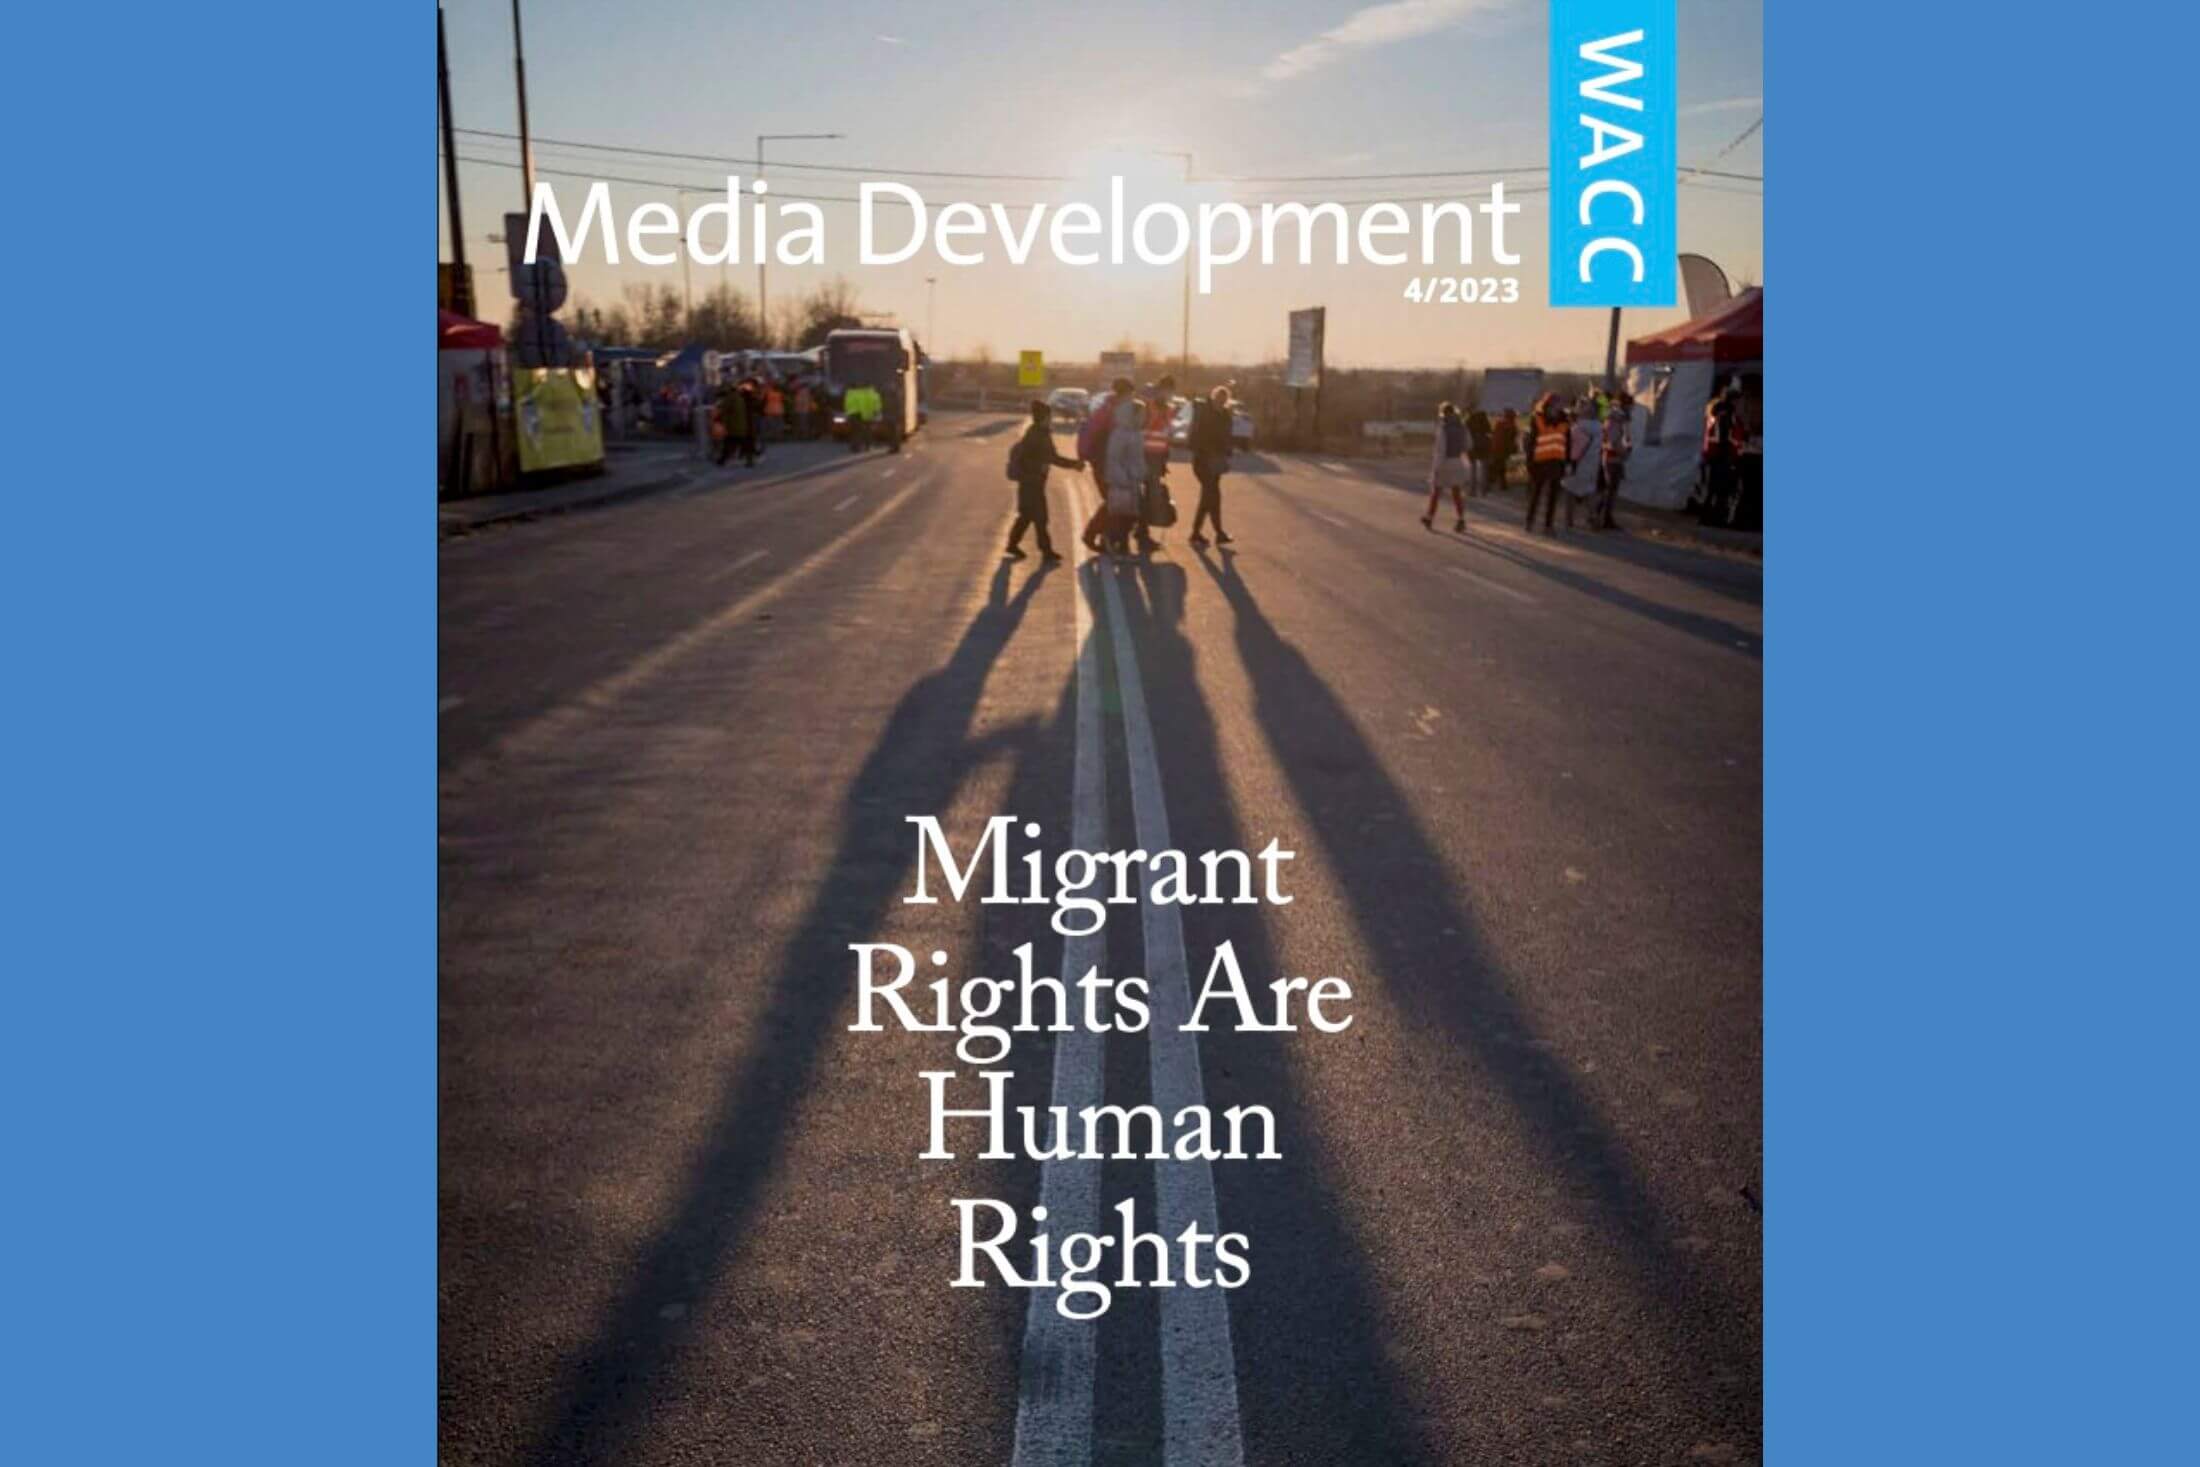 Magazine cover that reads Media Development. Several people with backpacks and bundles on their backs cross a paved road. The sun is rising and casts their shadows onto the road.